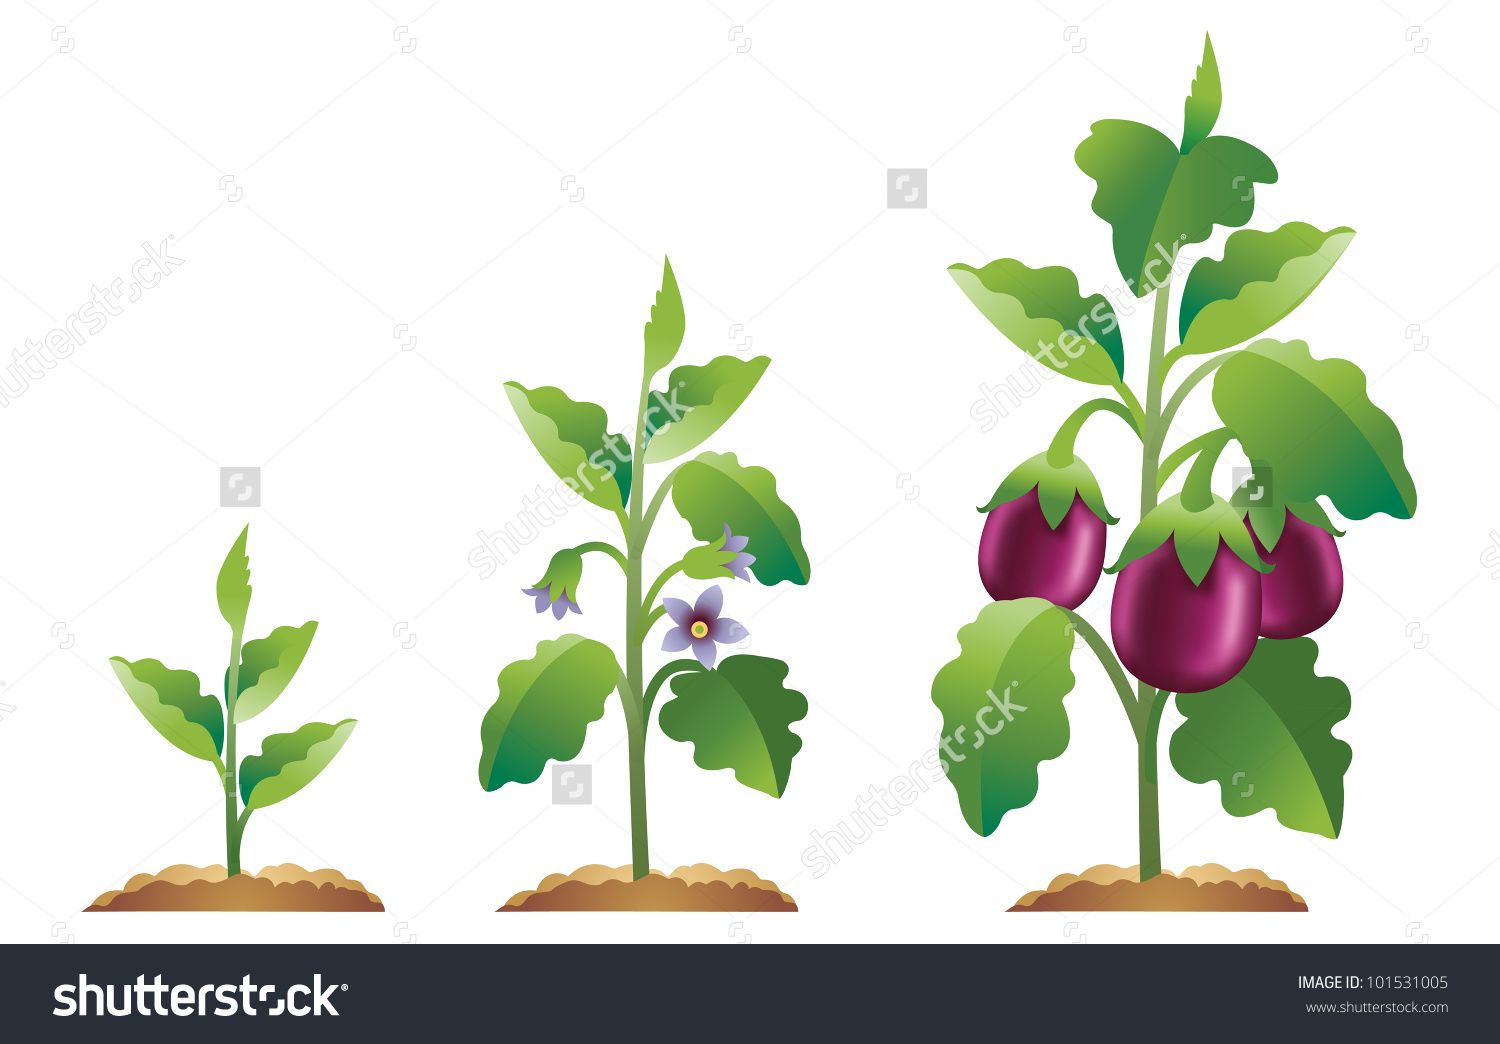 Eggplant growth stages.